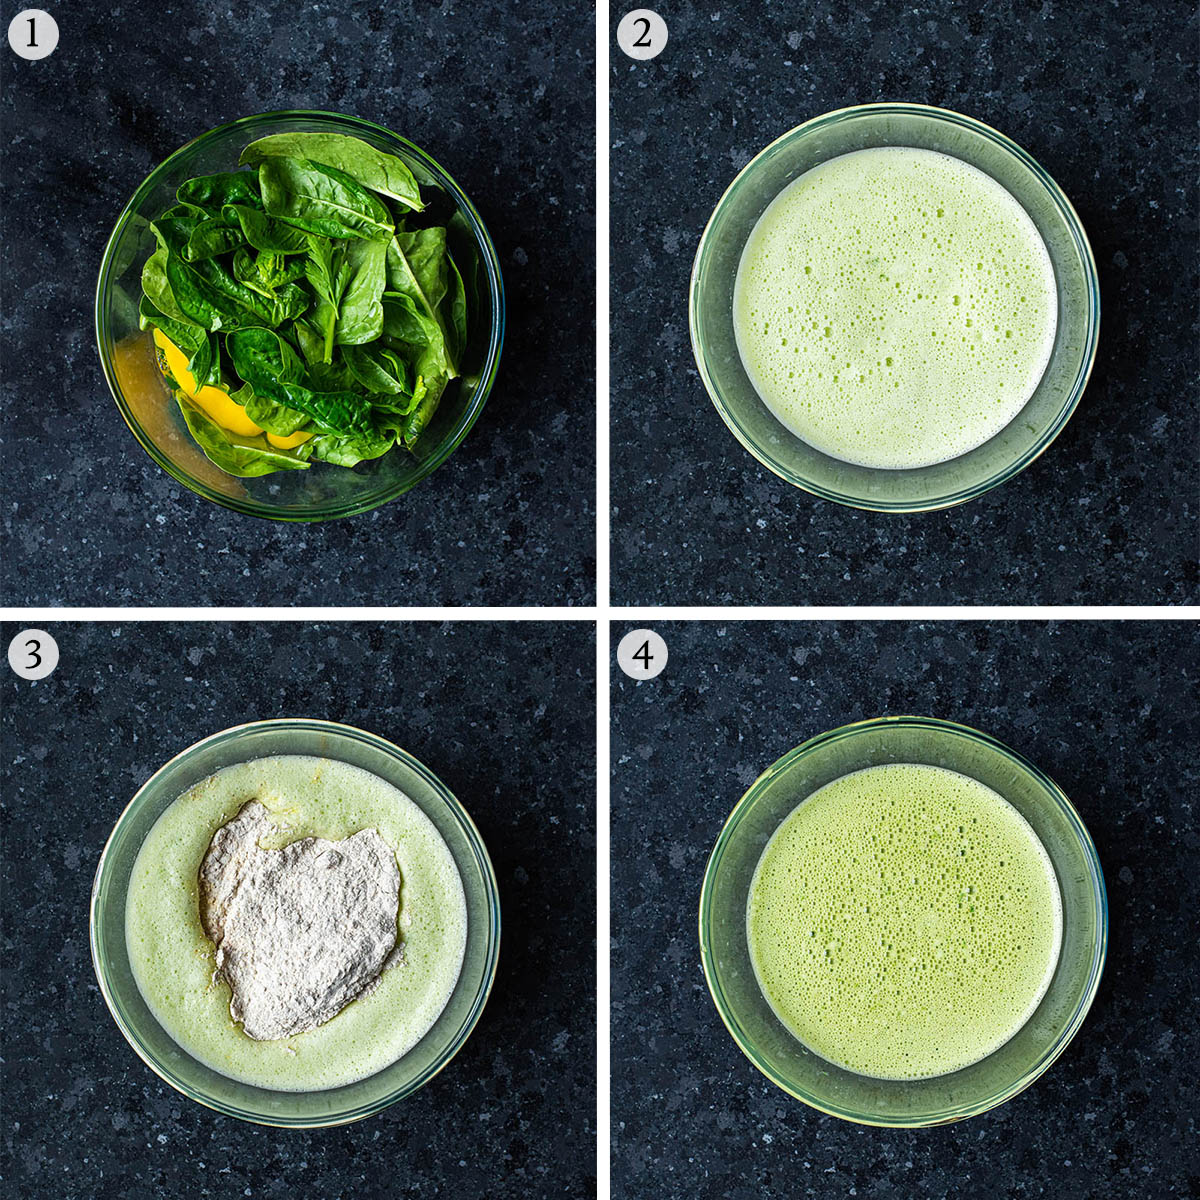 Filled spinach pancakes steps 1 to 4.